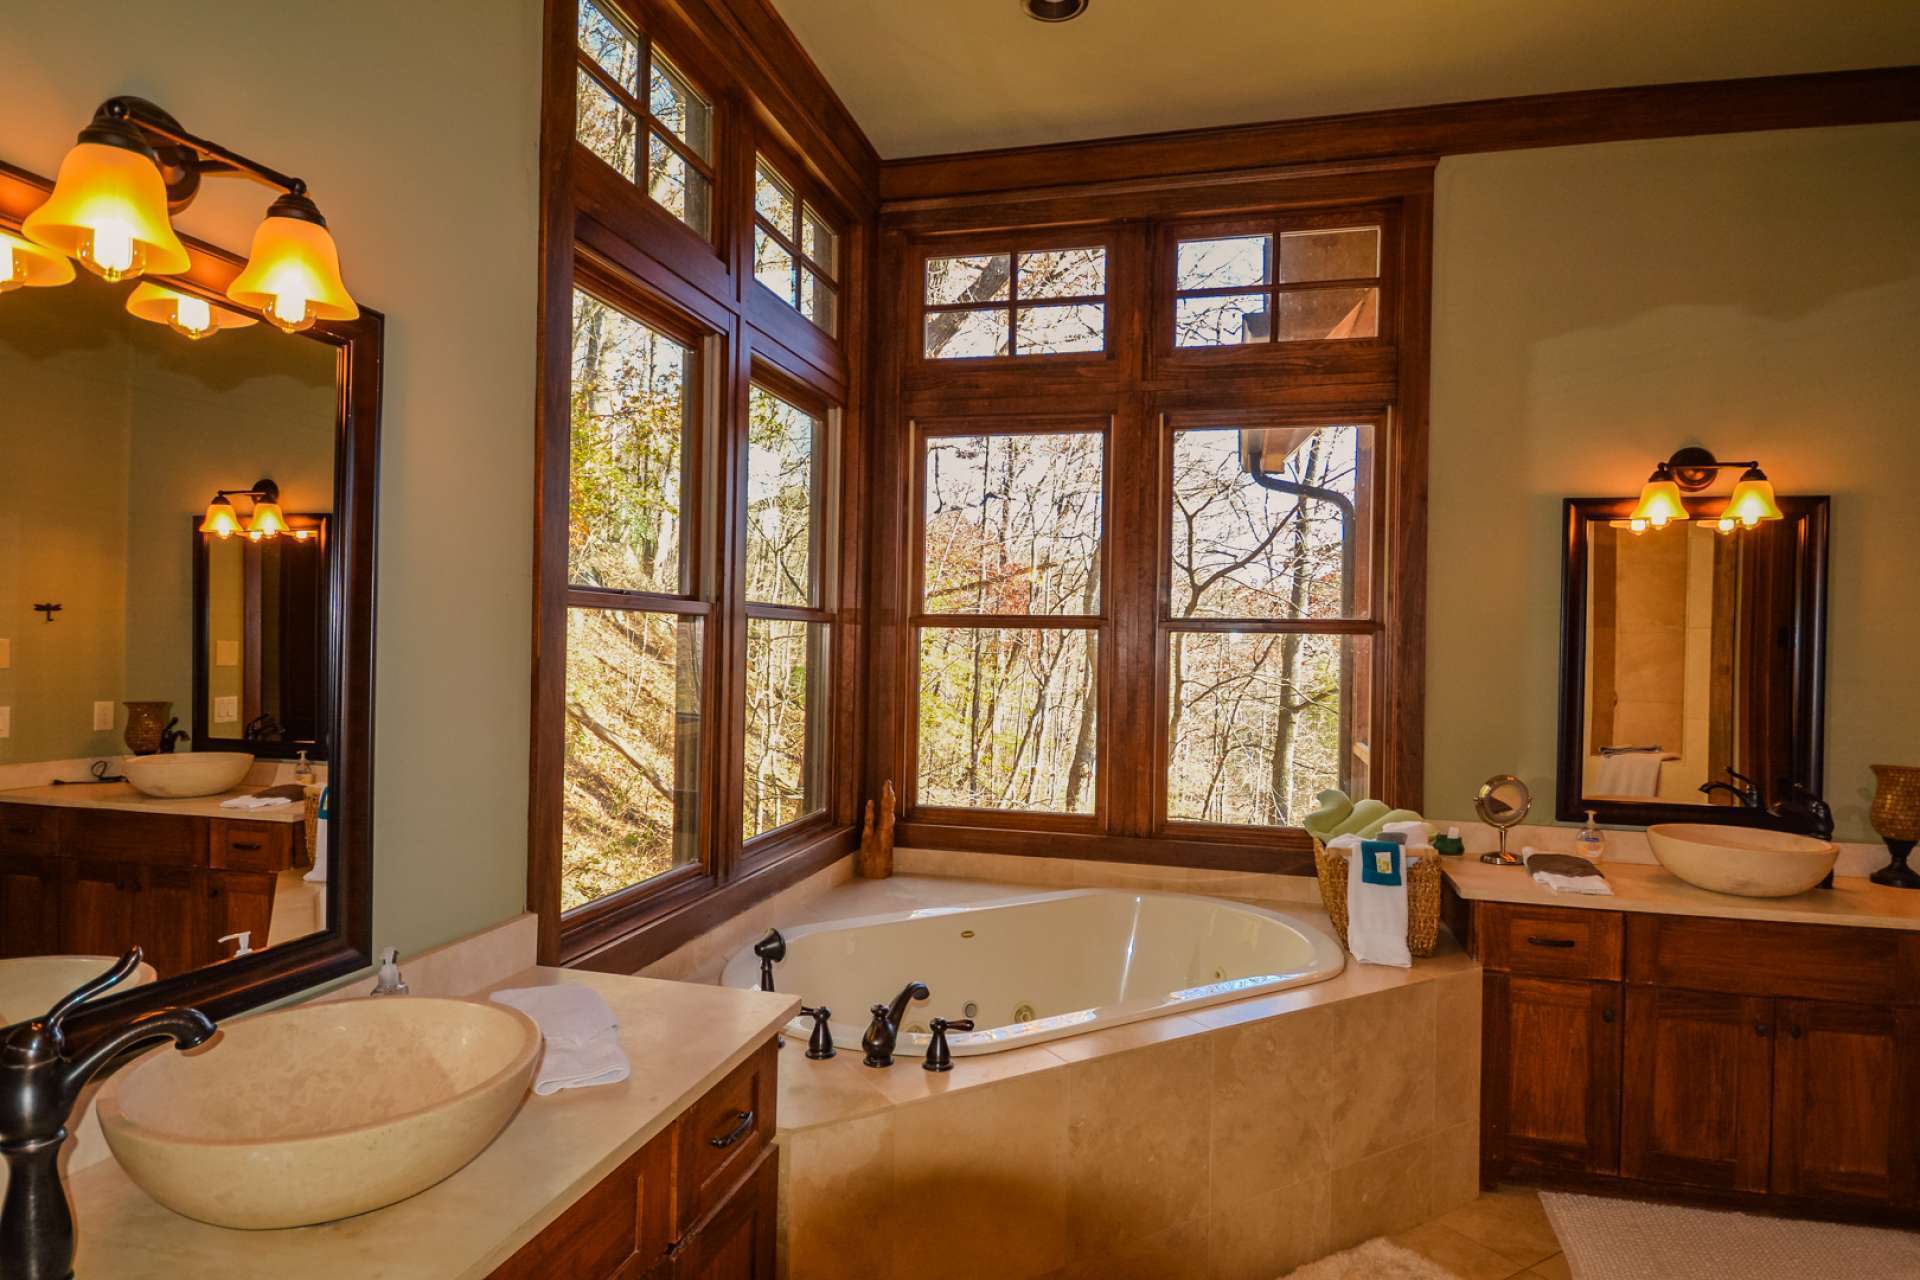 The master bath features a whirlpool tub, walk-in closet and a gorgeous walk-in tiled shower.